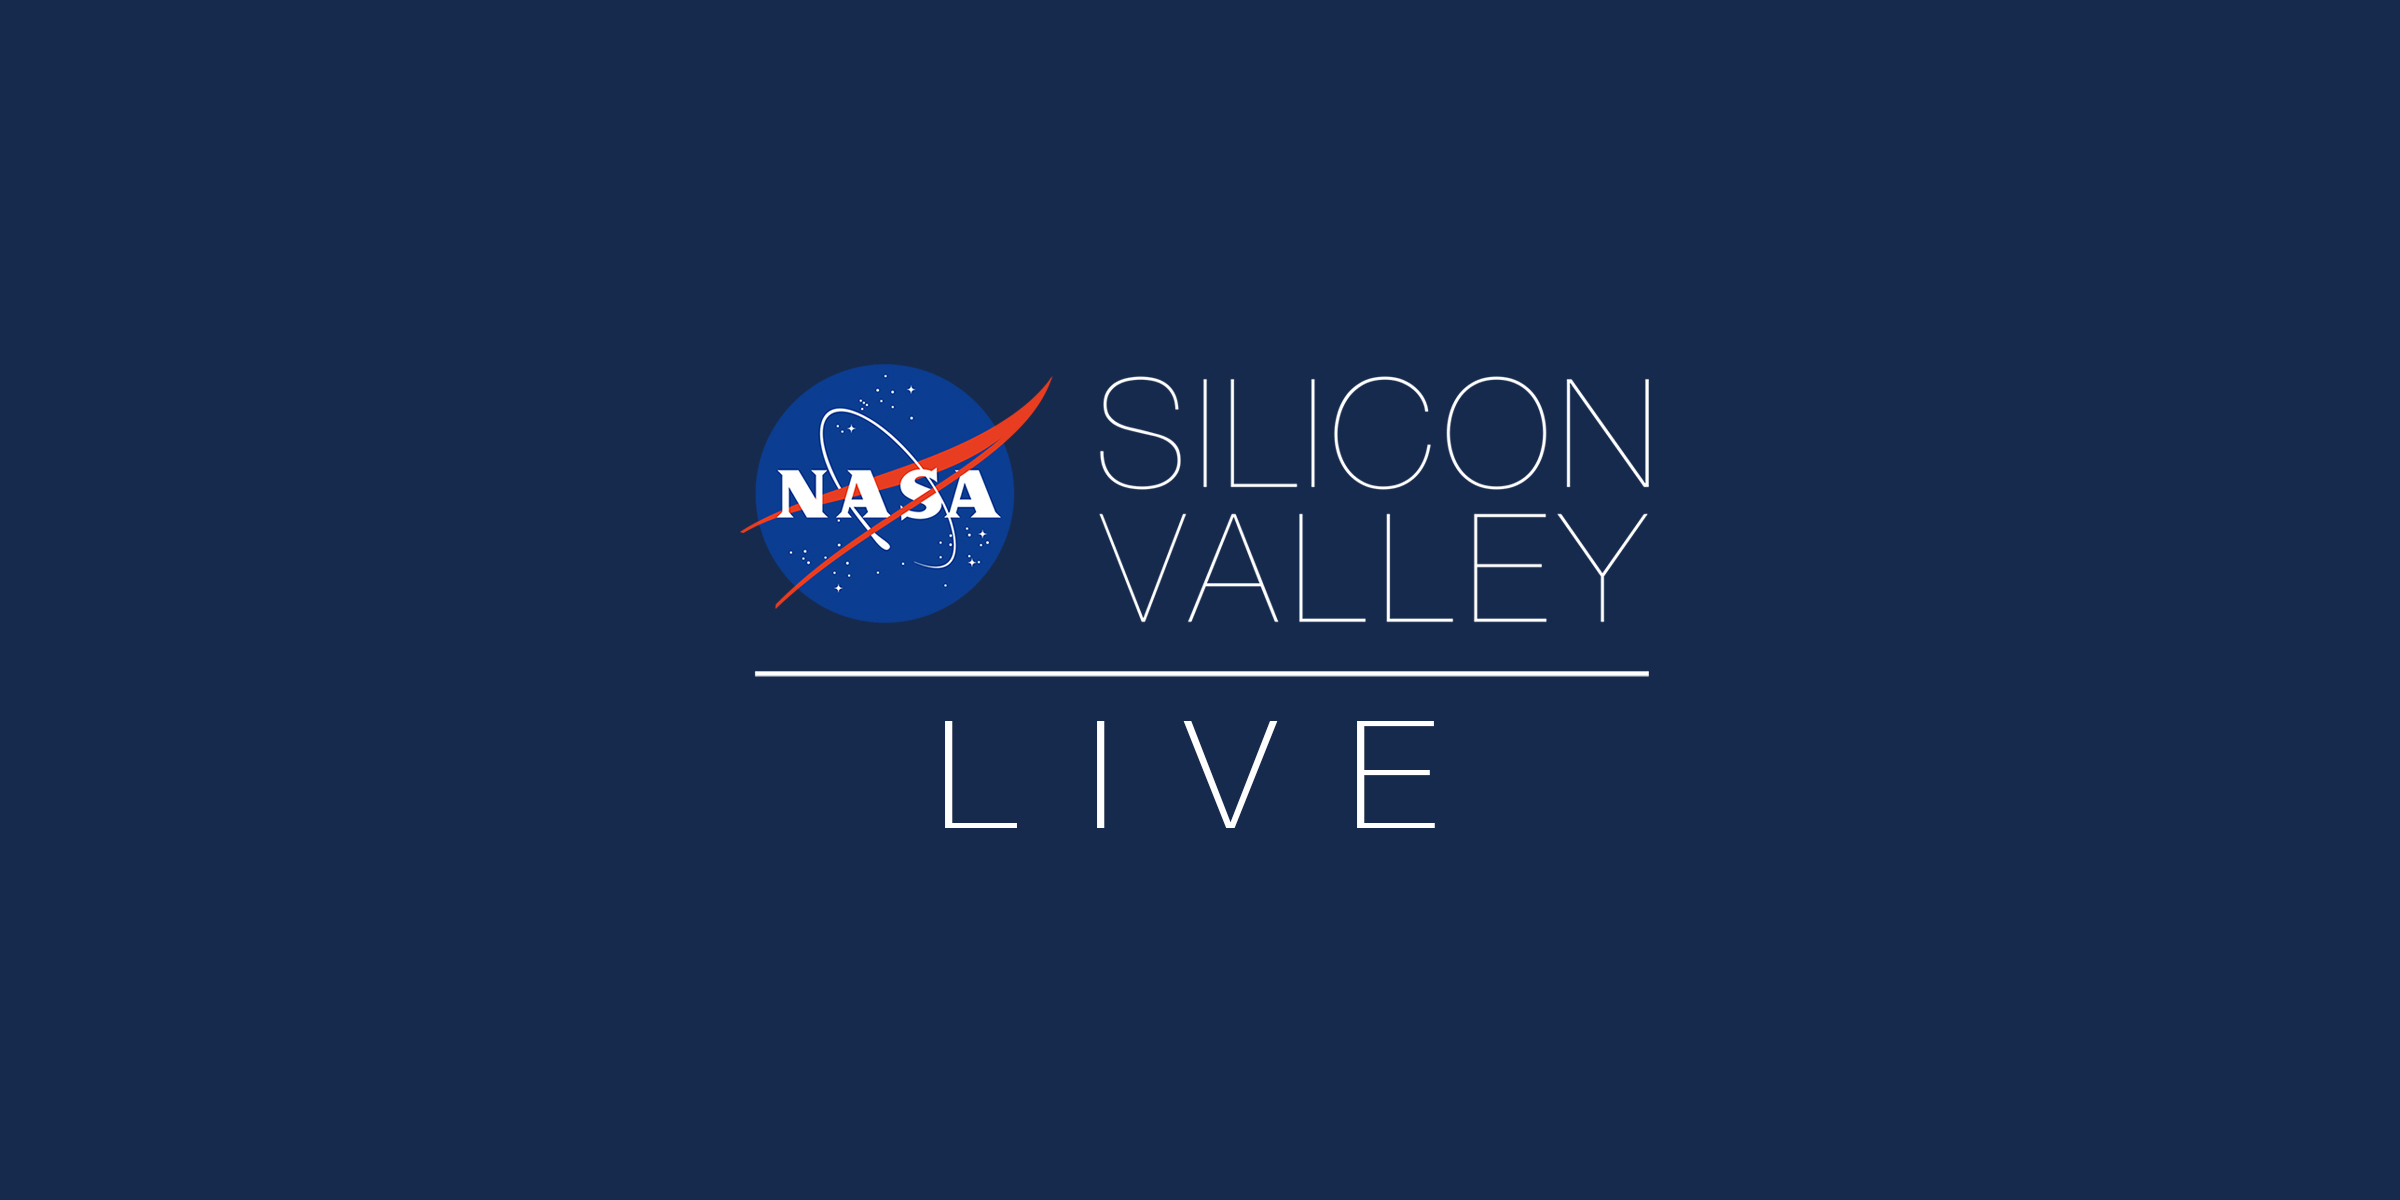 NASA in Silicon Valley Live – Air Taxis and the Future of Flight